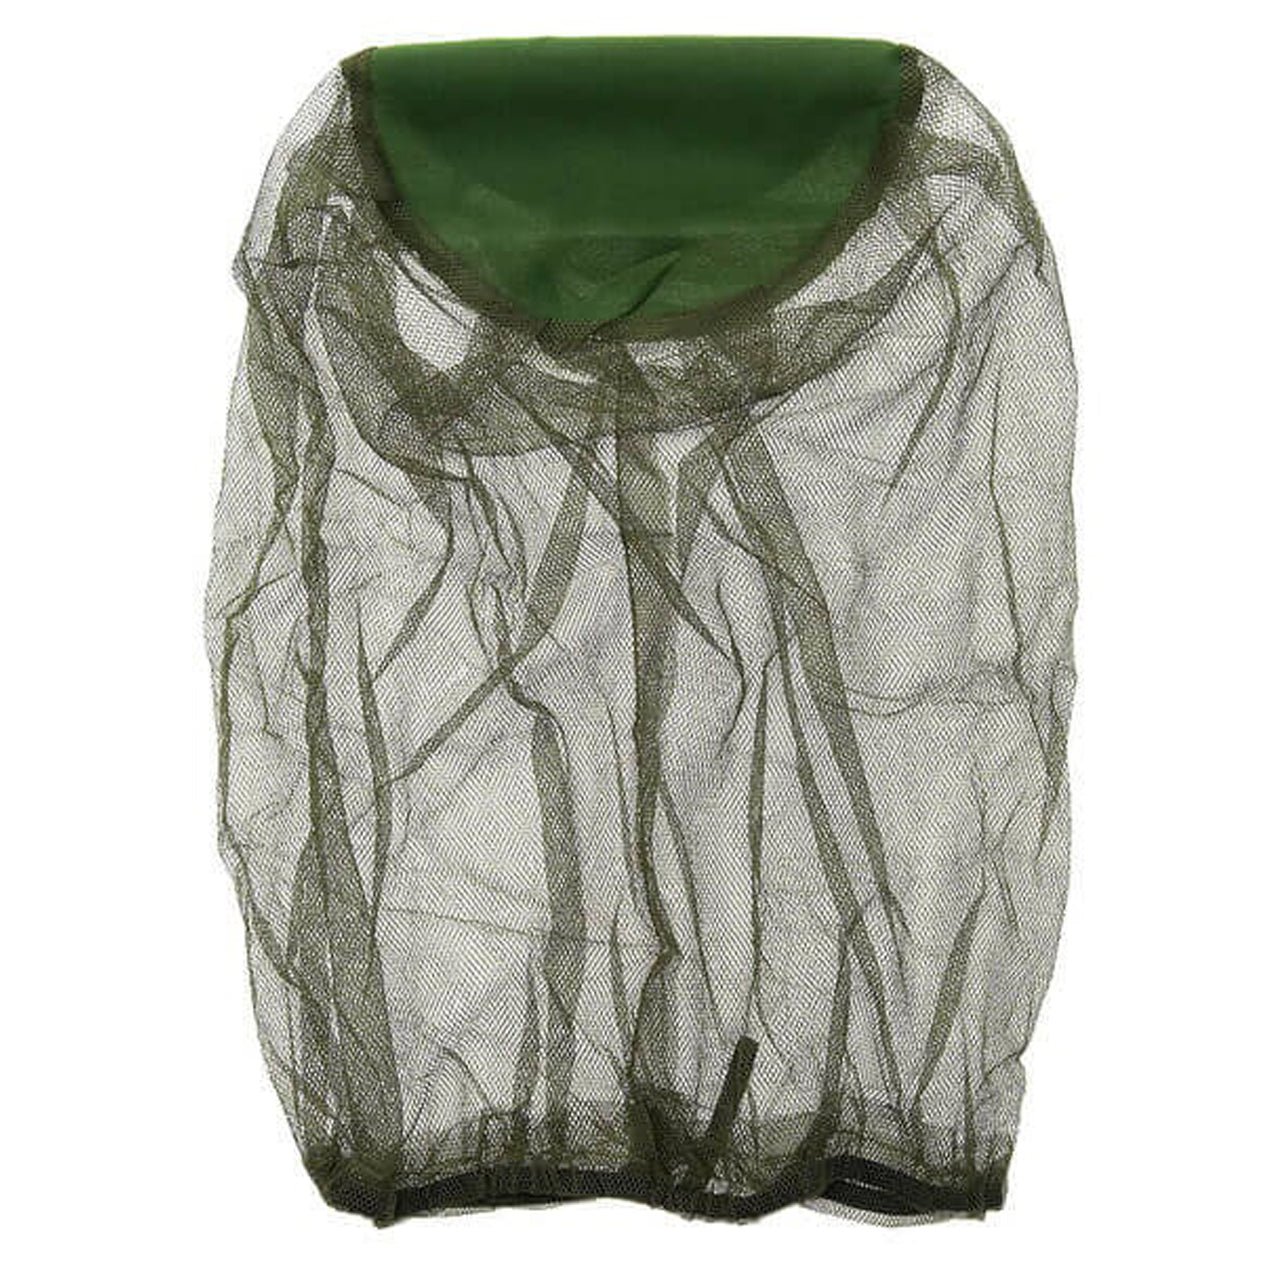 Mosquito head net is detailed with cotton fabric on top of the head for placement, tight polyester mesh for protection against insects and flies around the face. This product is easily folded to take with you anywhere and everywhere. www.defenceqstore.com.au